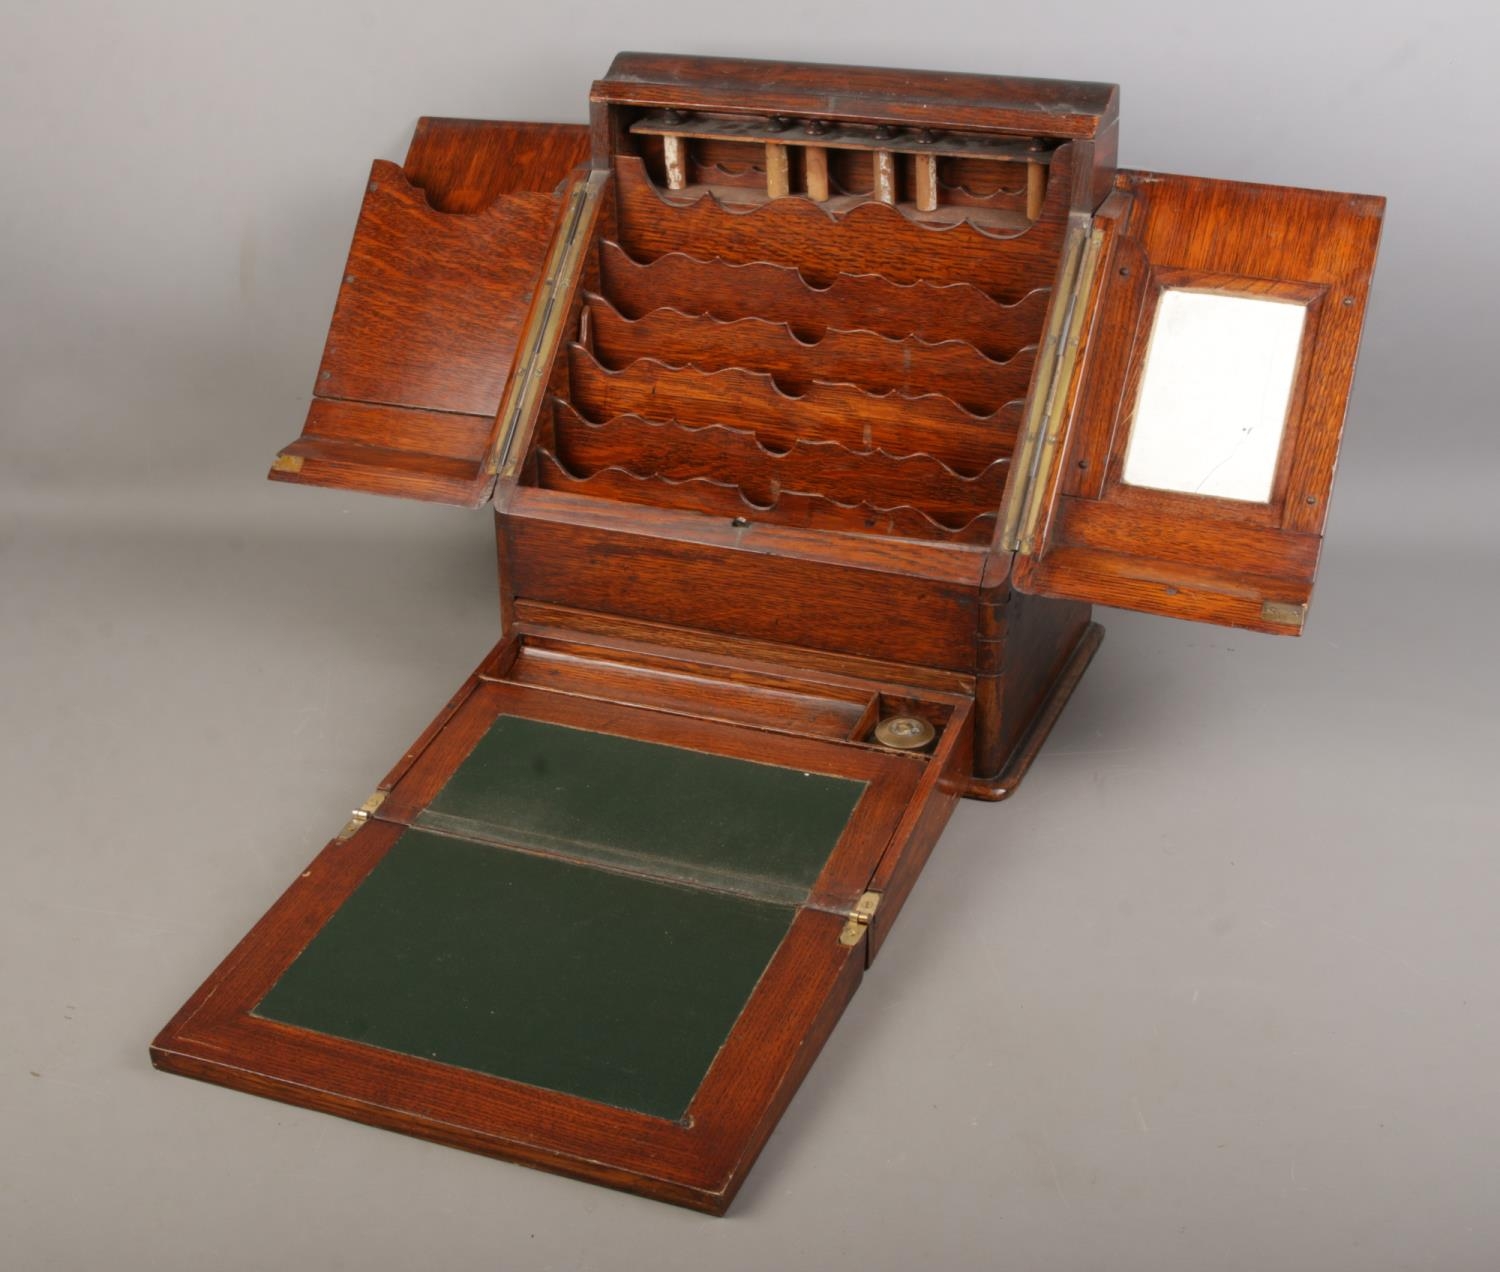 An oak stationary box with bottom draw developing into a writing slope brass handle is detached